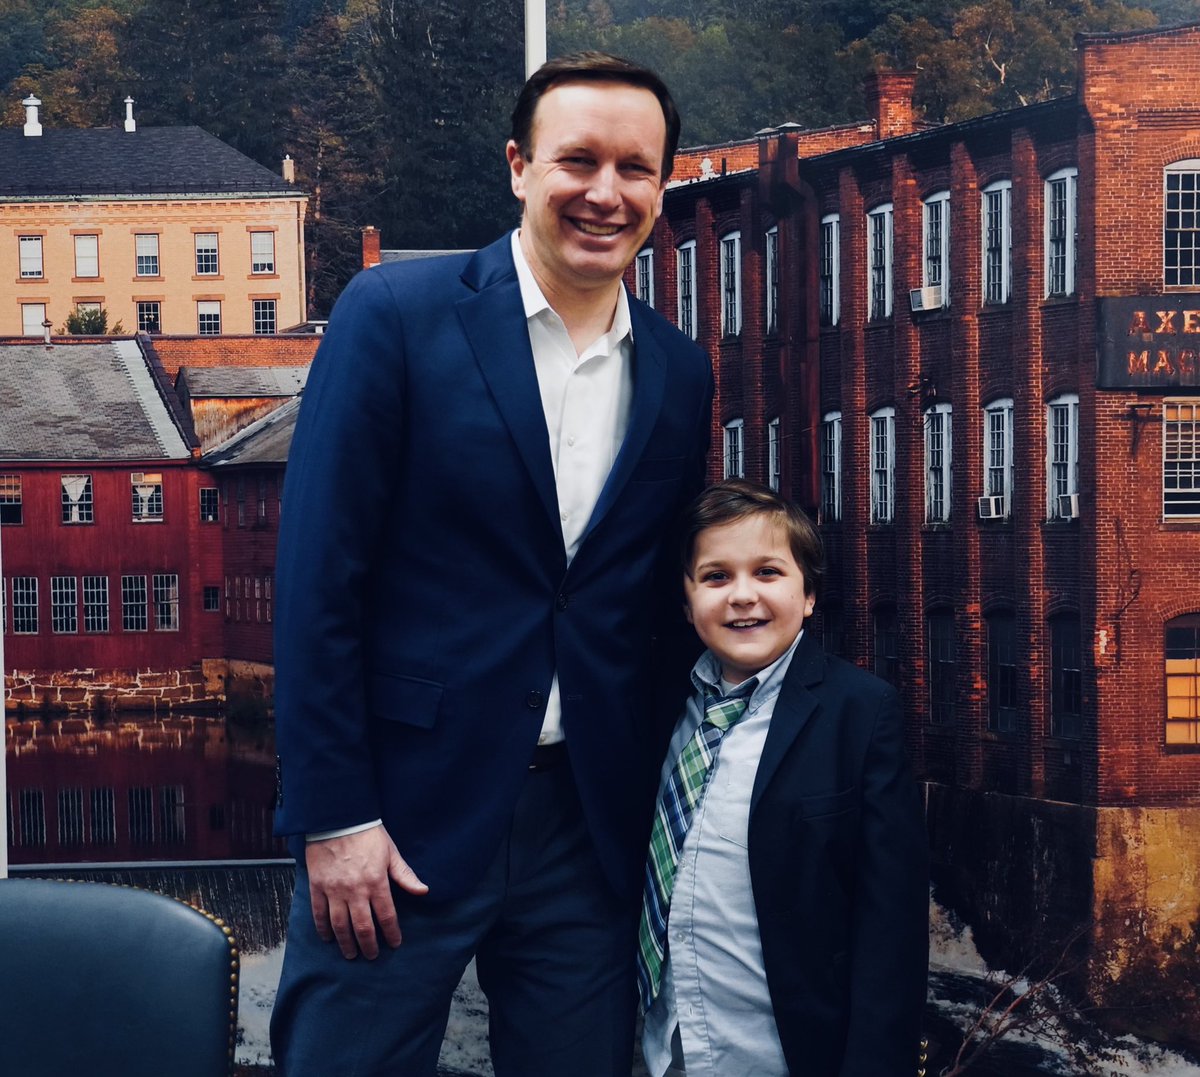 My friend Conner Curran is 12 and he’s one of my heroes. He lives with Duchenne muscular dystrophy, and advocates for kids like him. He helped convince me to bring $2m in federal money to Connecticut for research on muscular dystrophy. I was so glad to see him yesterday.